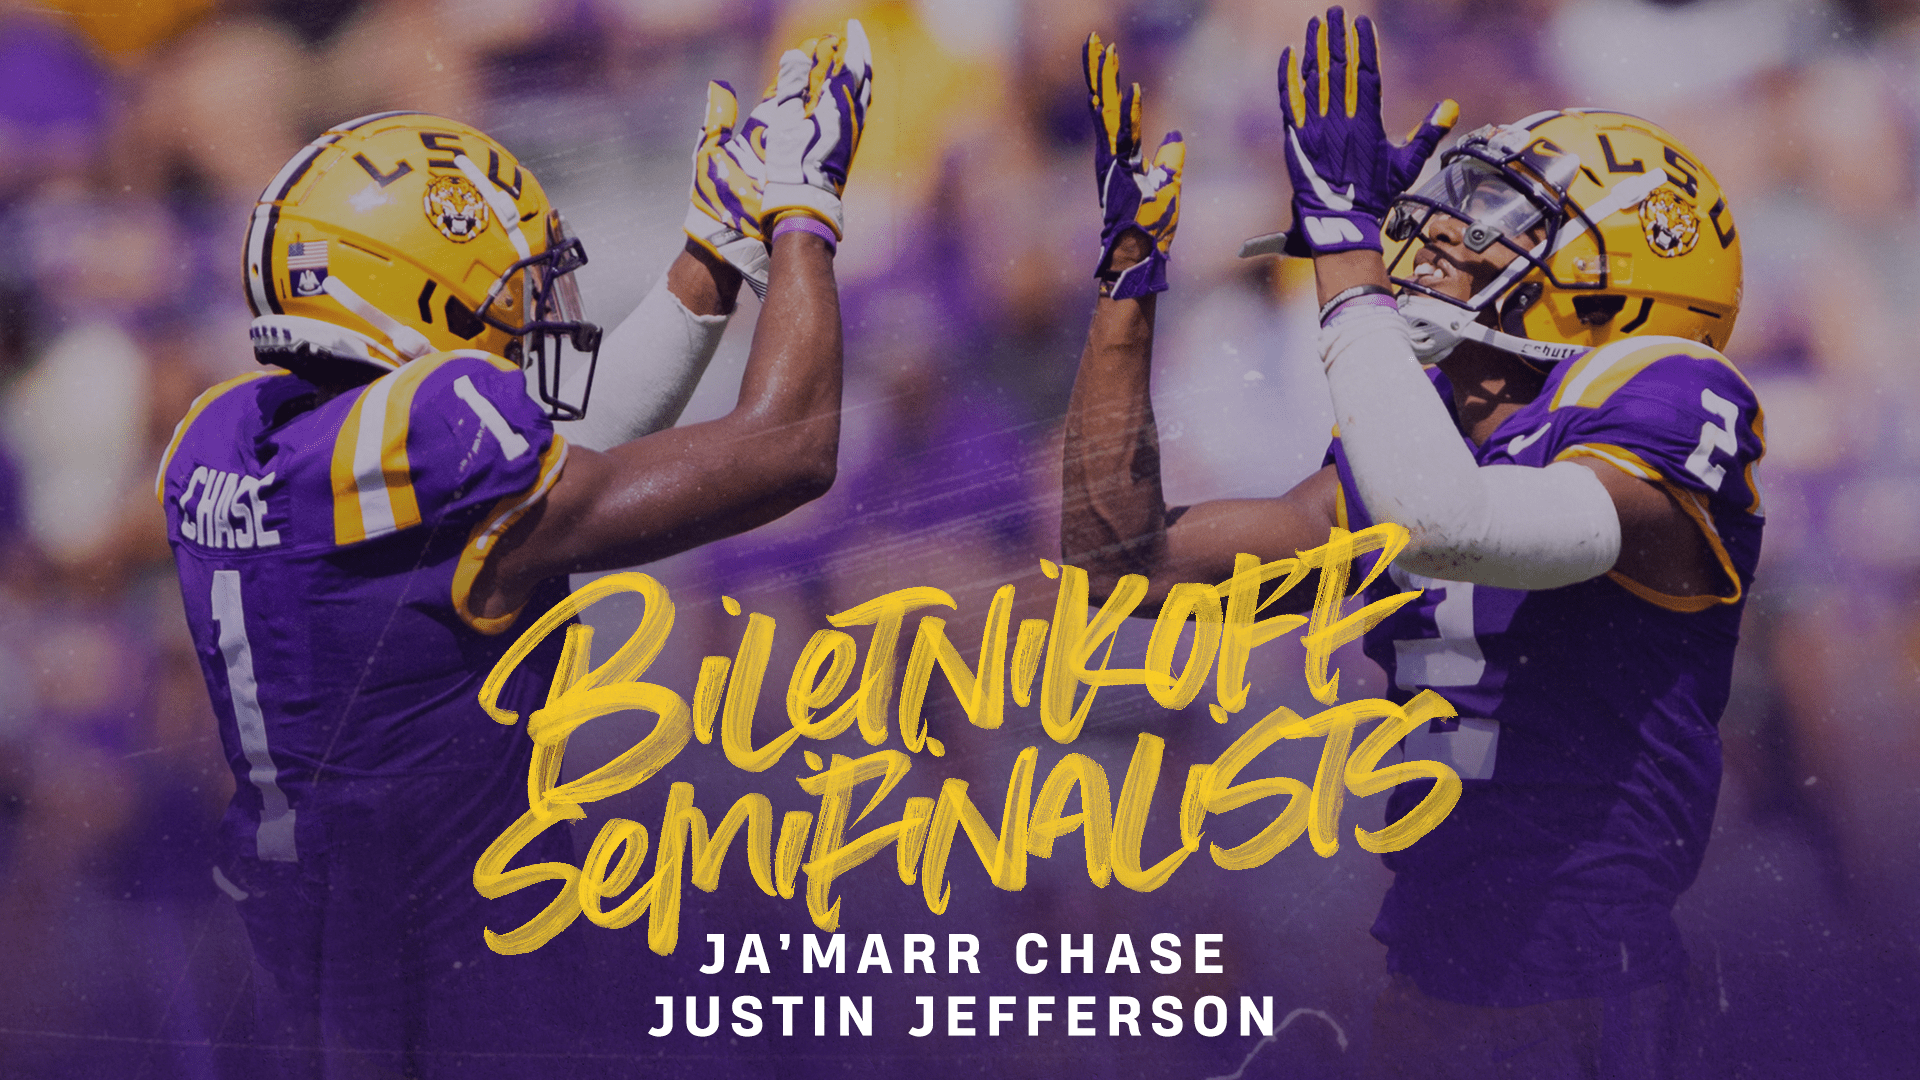 LSU wide receivers Ja'Marr Chase and Justin Jefferson Named